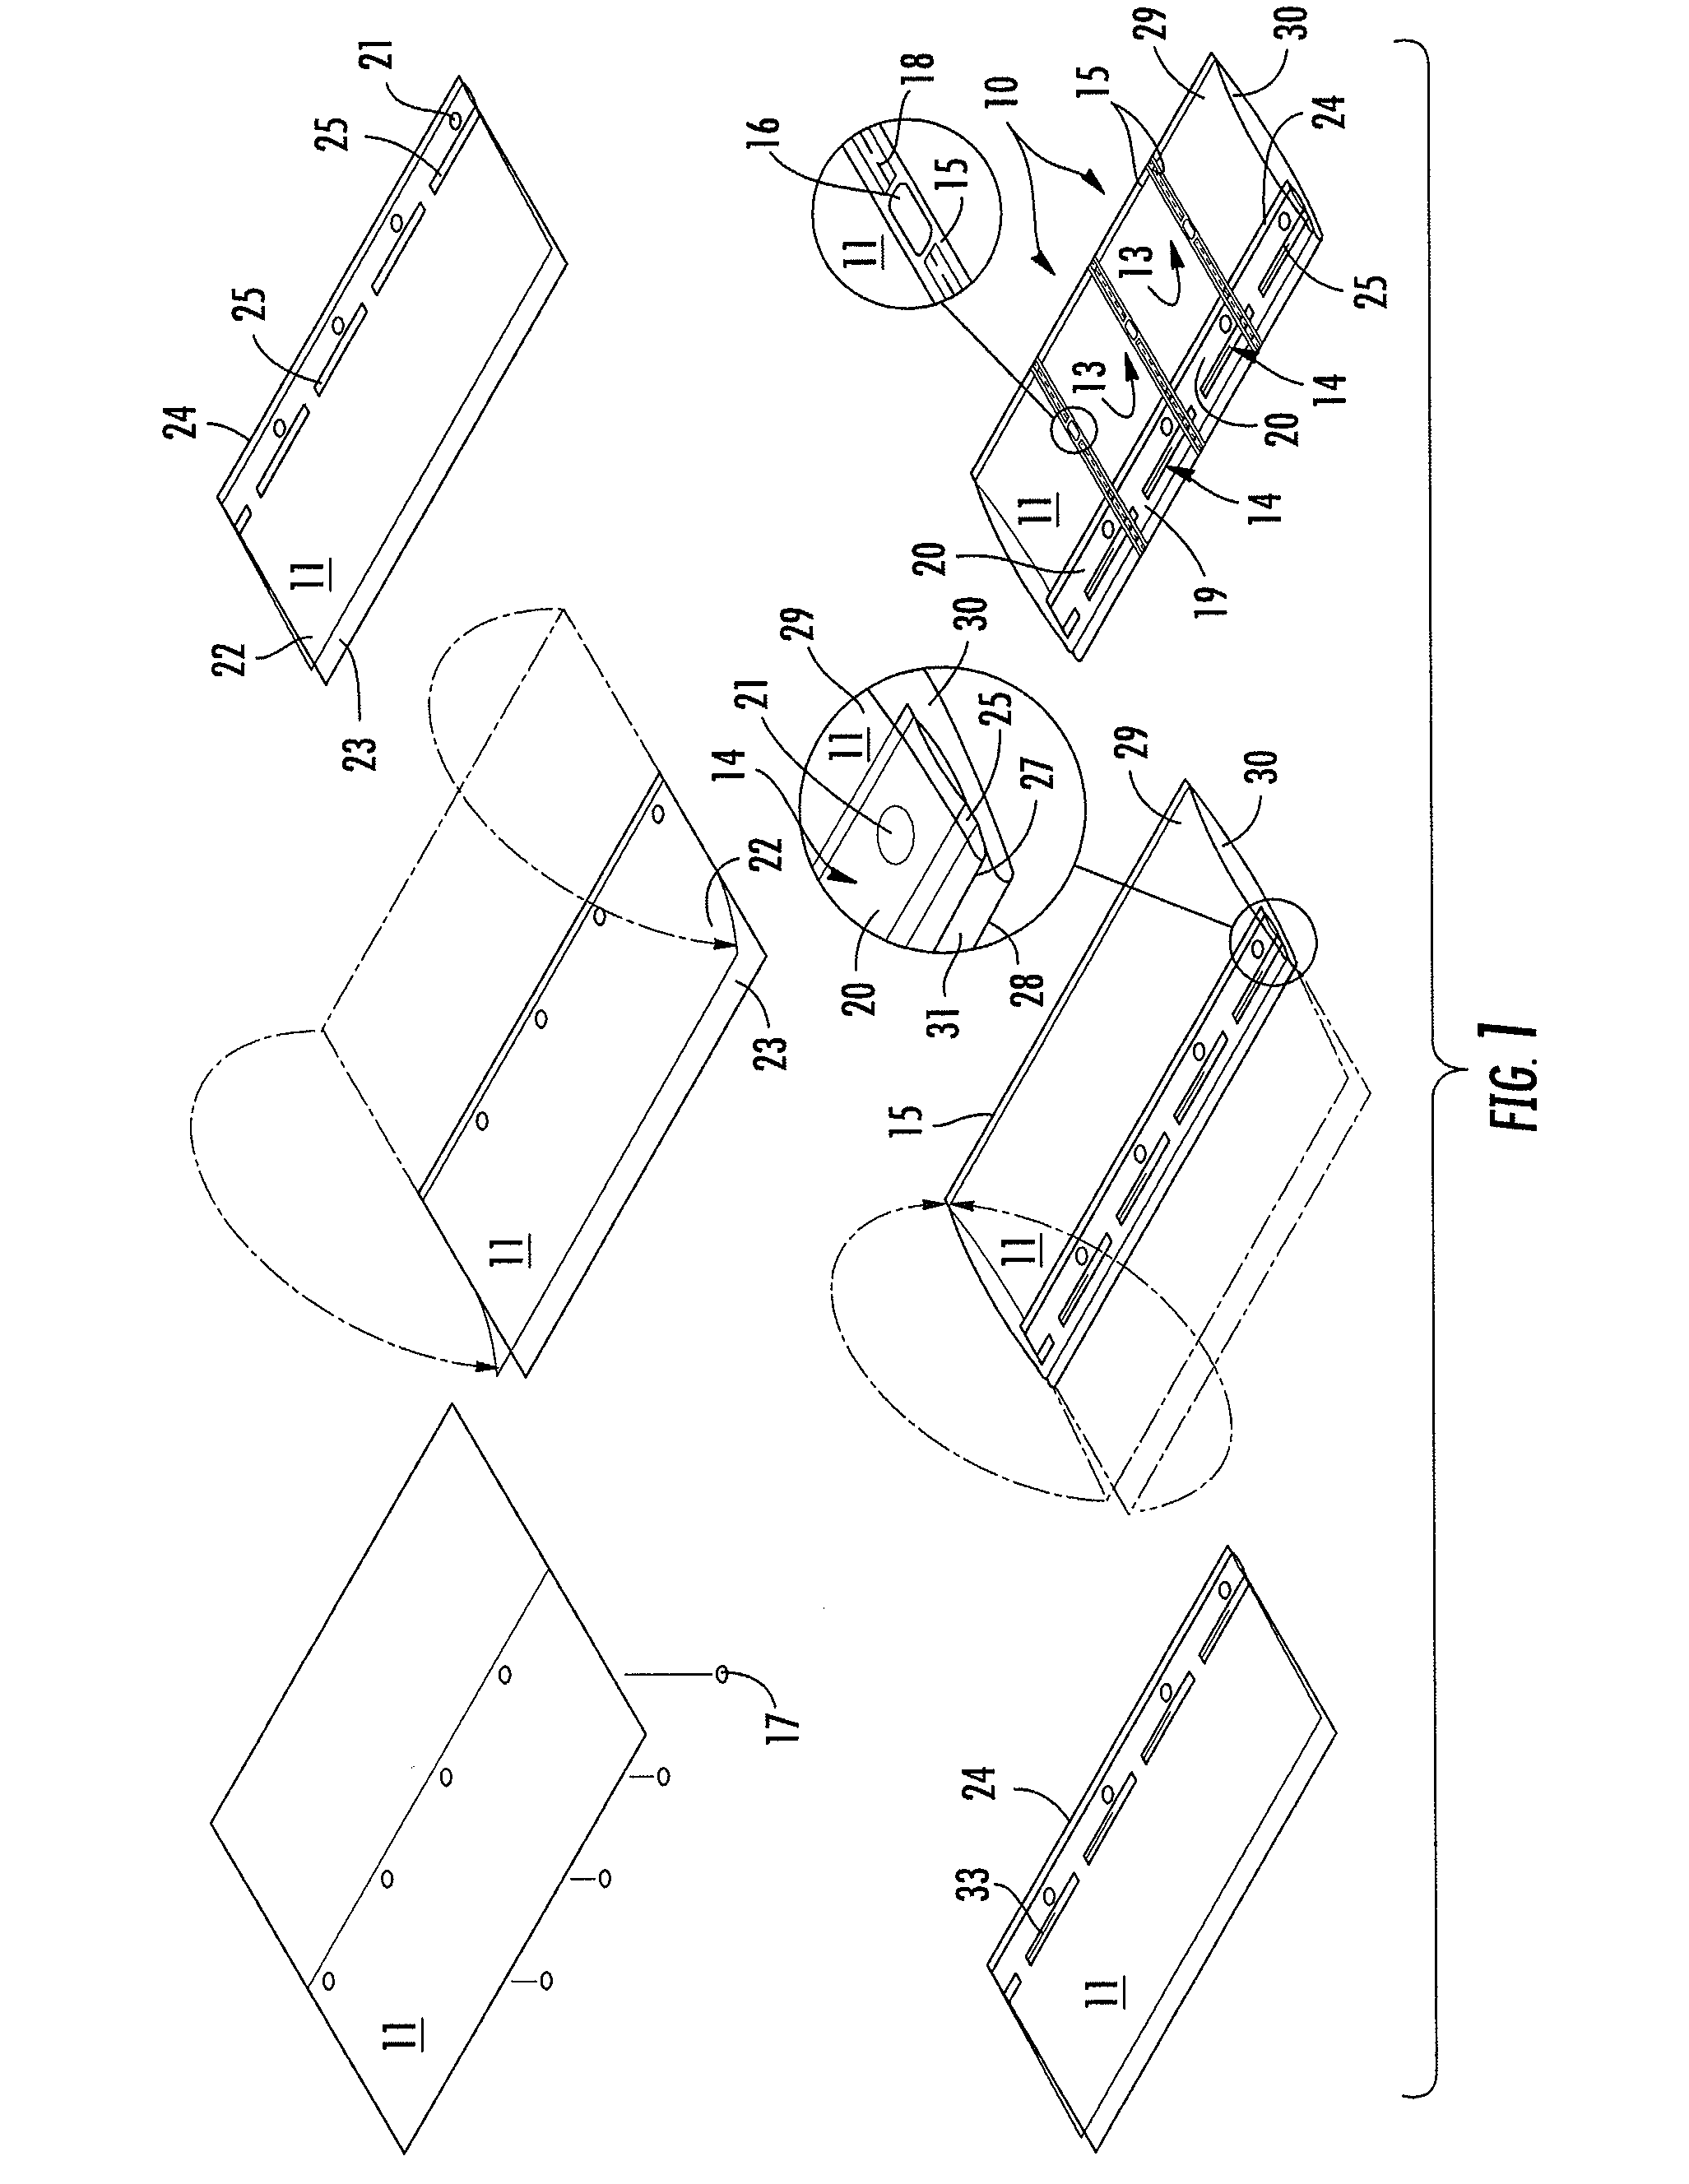 Inflatable Structure for Packaging and Associated Apparatus and Method